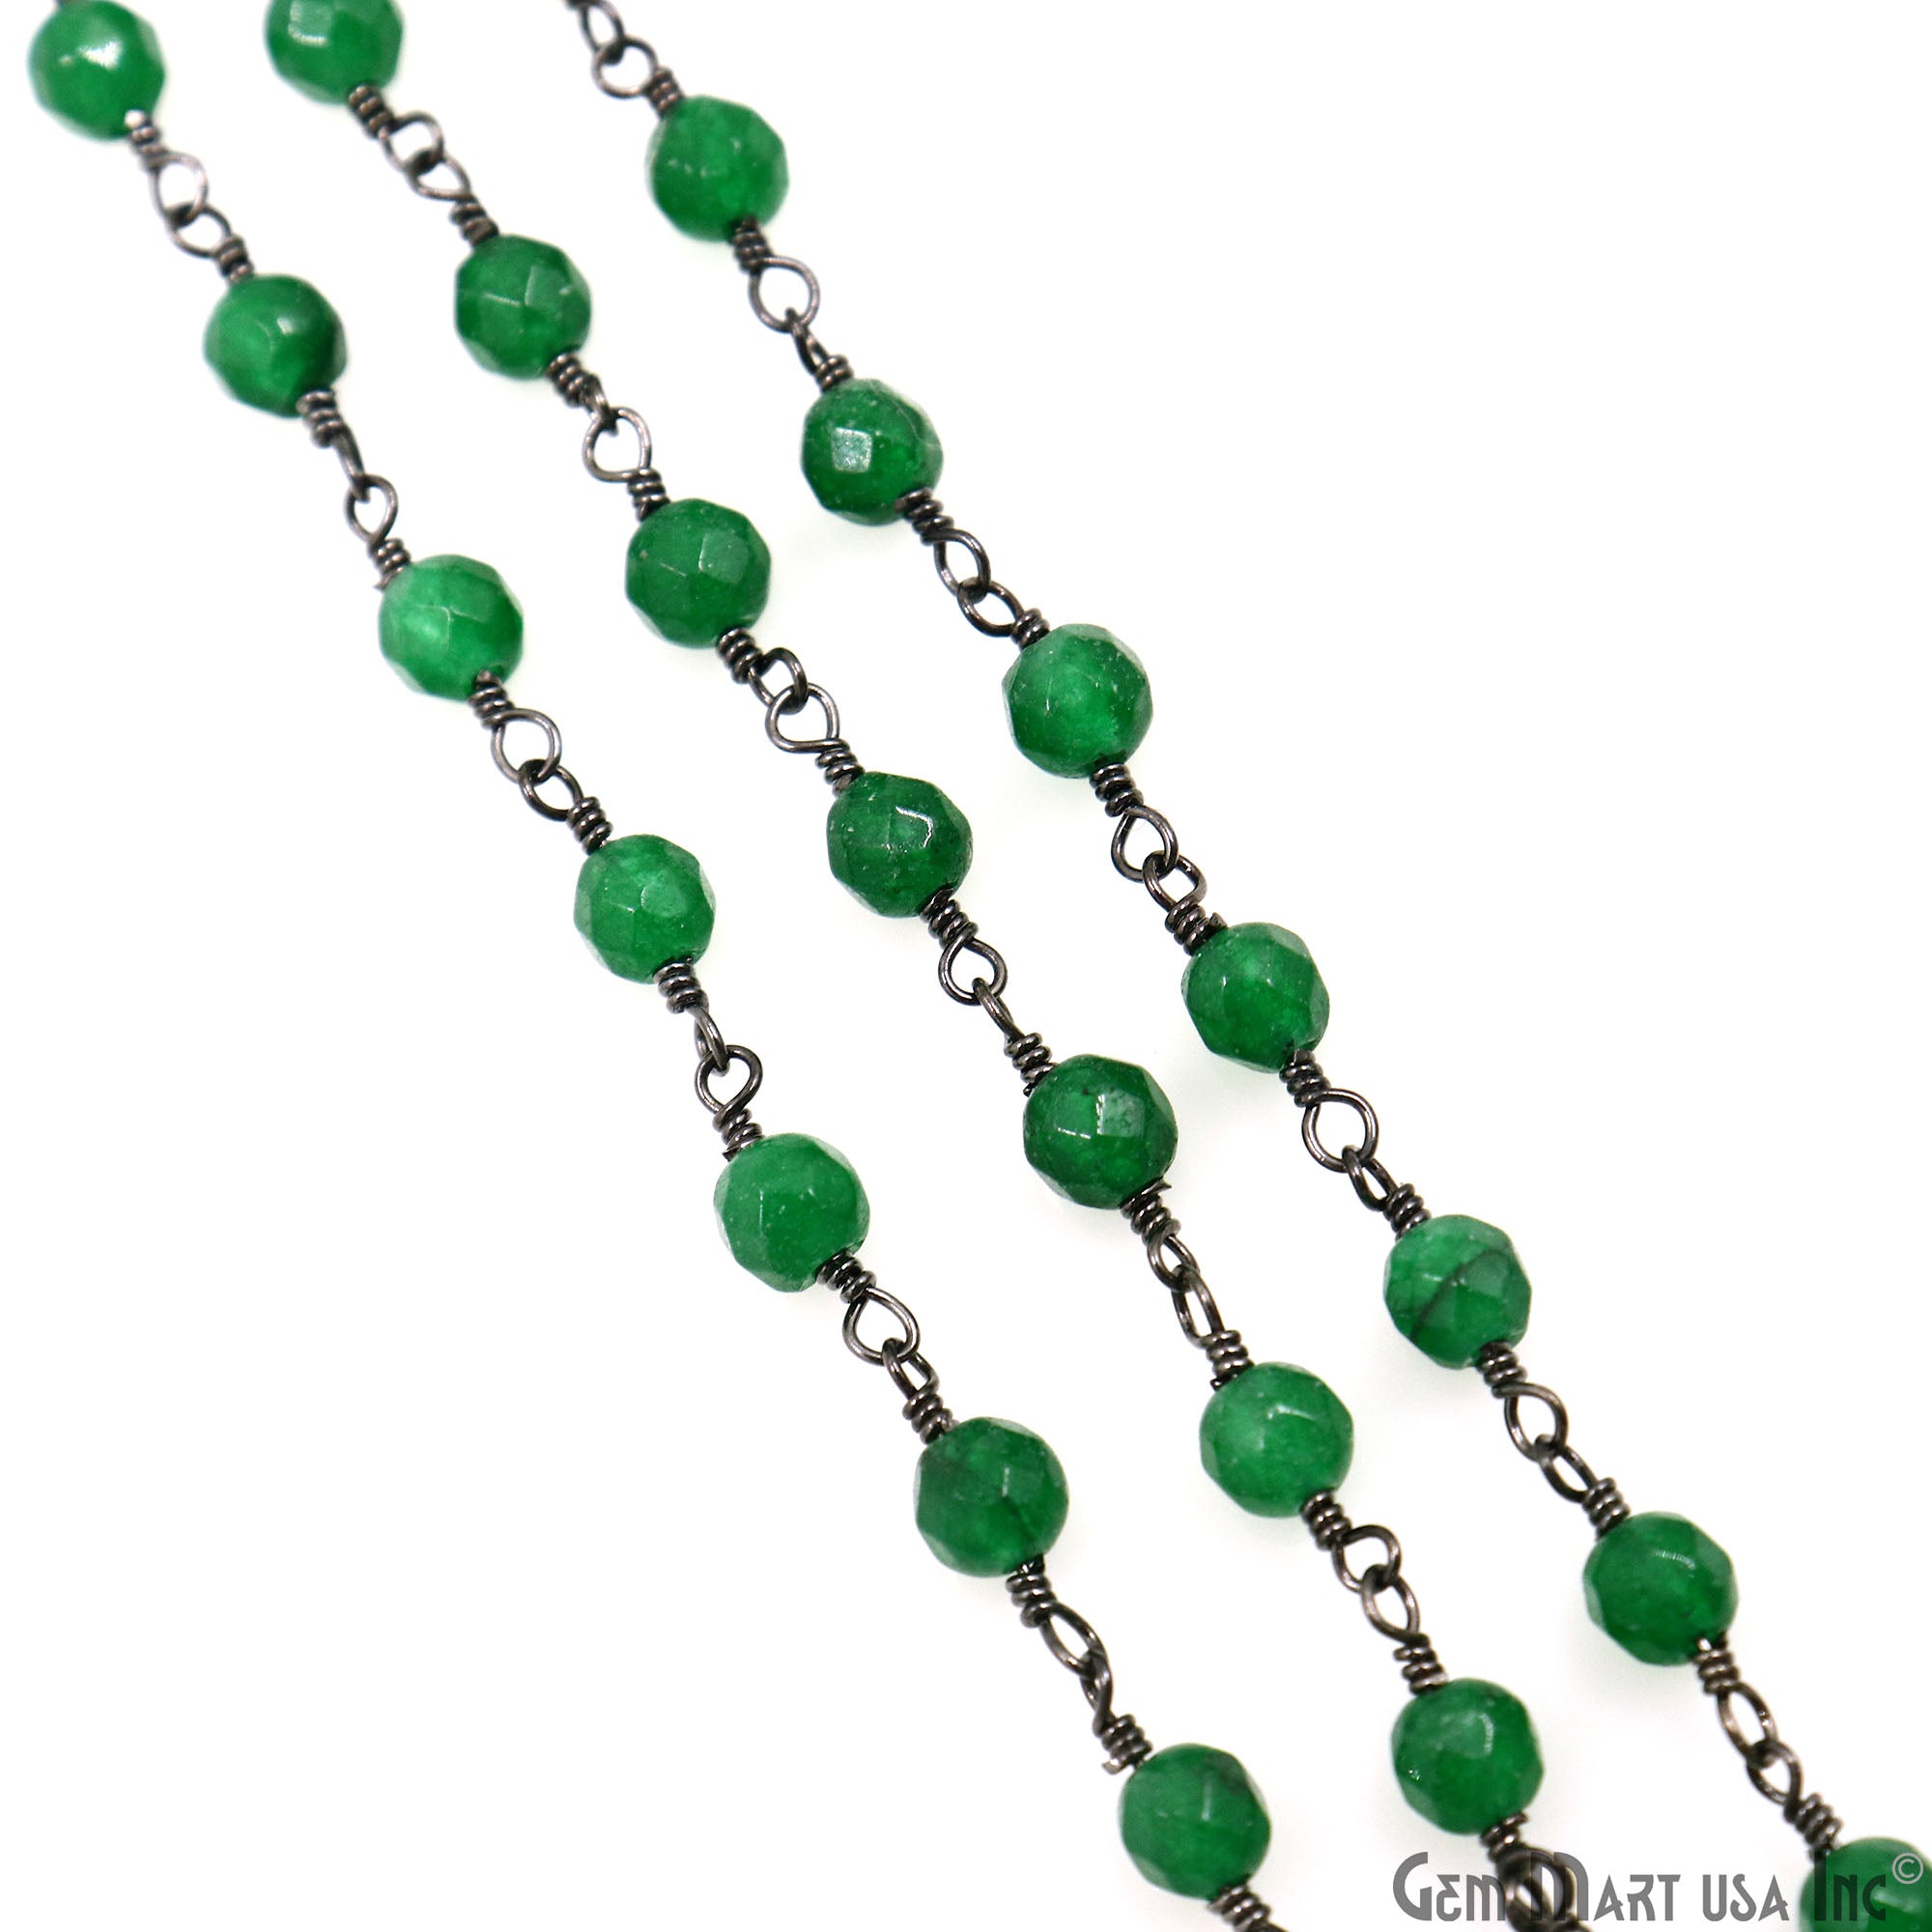 Green Jade Faceted Beads 4mm Oxidized Wire Wrapped Rosary Chain